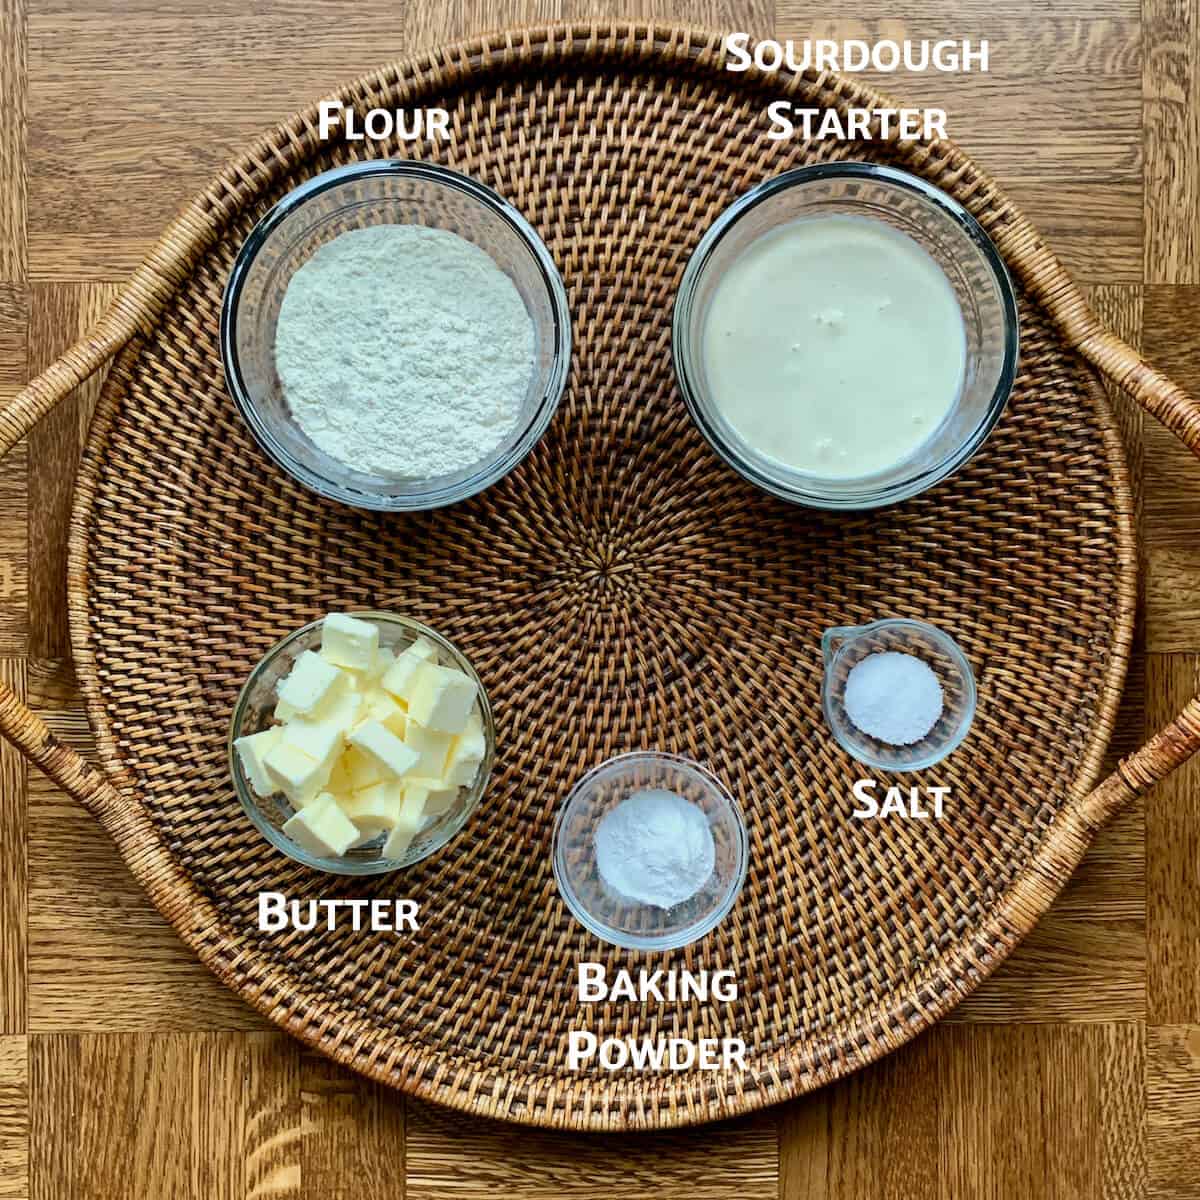 Sourdough biscuit ingredients portioned into glass bowls on a wooden tray from overhead.